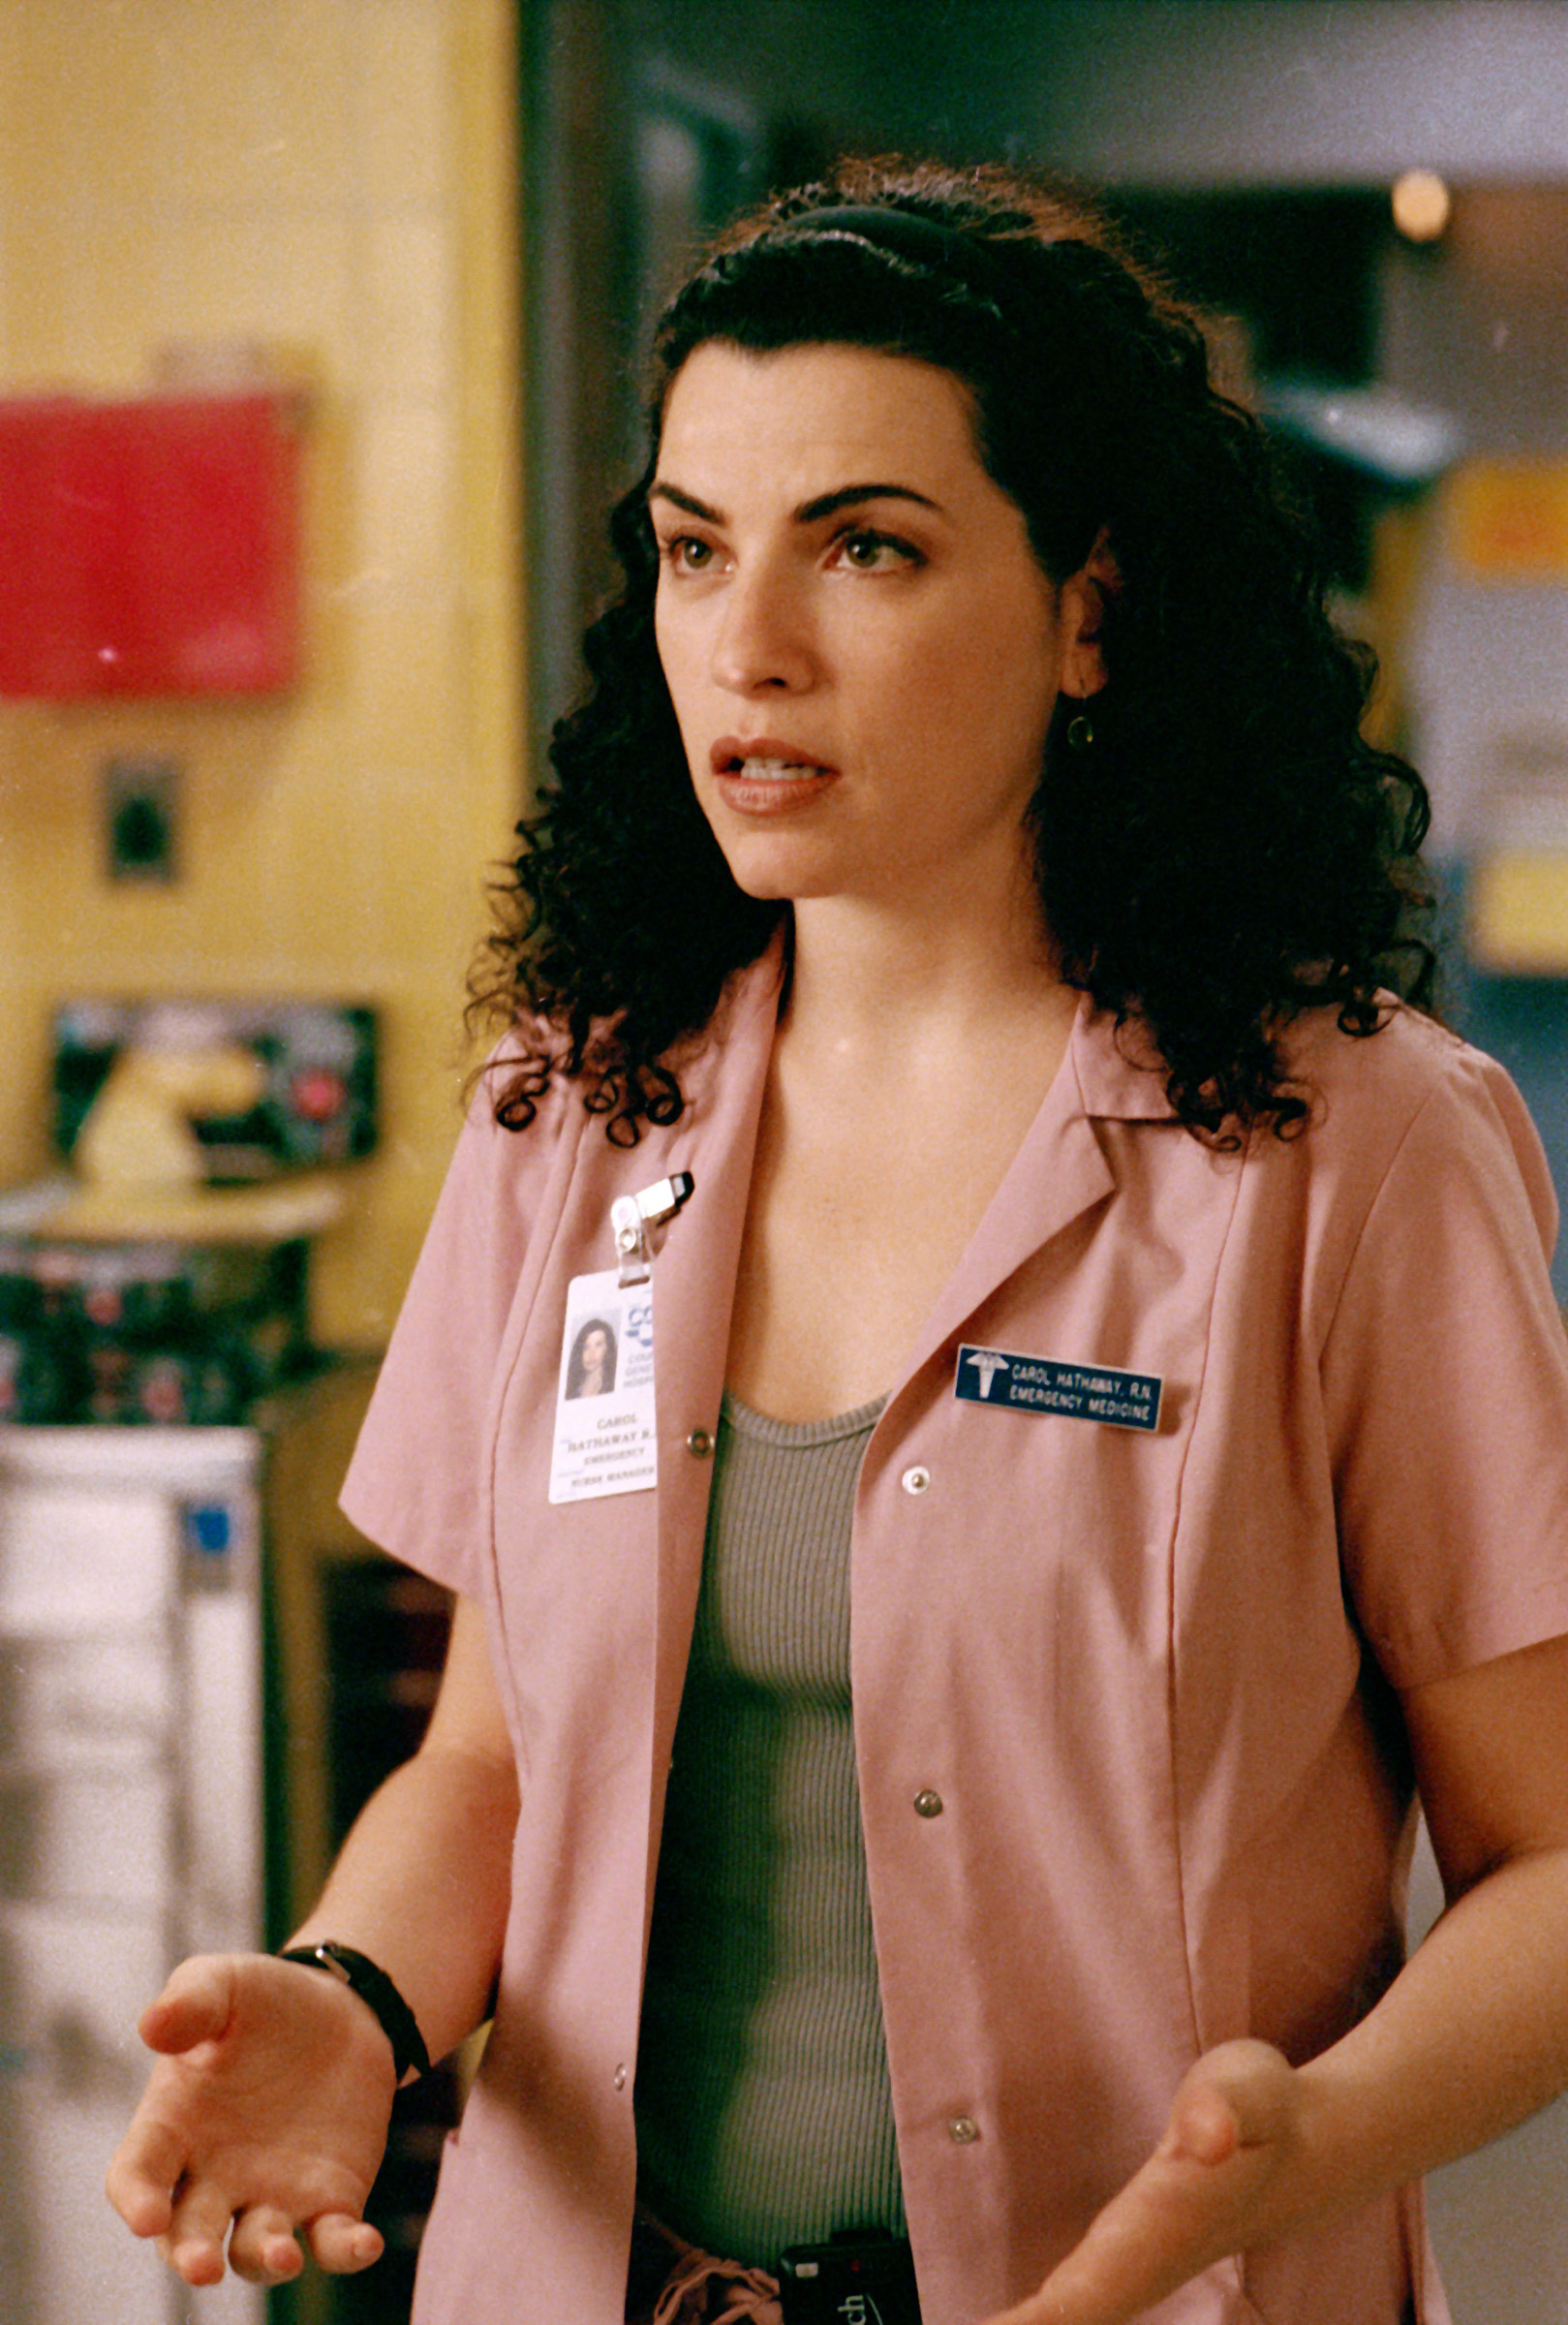 Julianna Margulies as Nurse Carol Hathaway in a scene from the TV show &quot;ER,&quot; wearing scrubs and a badge